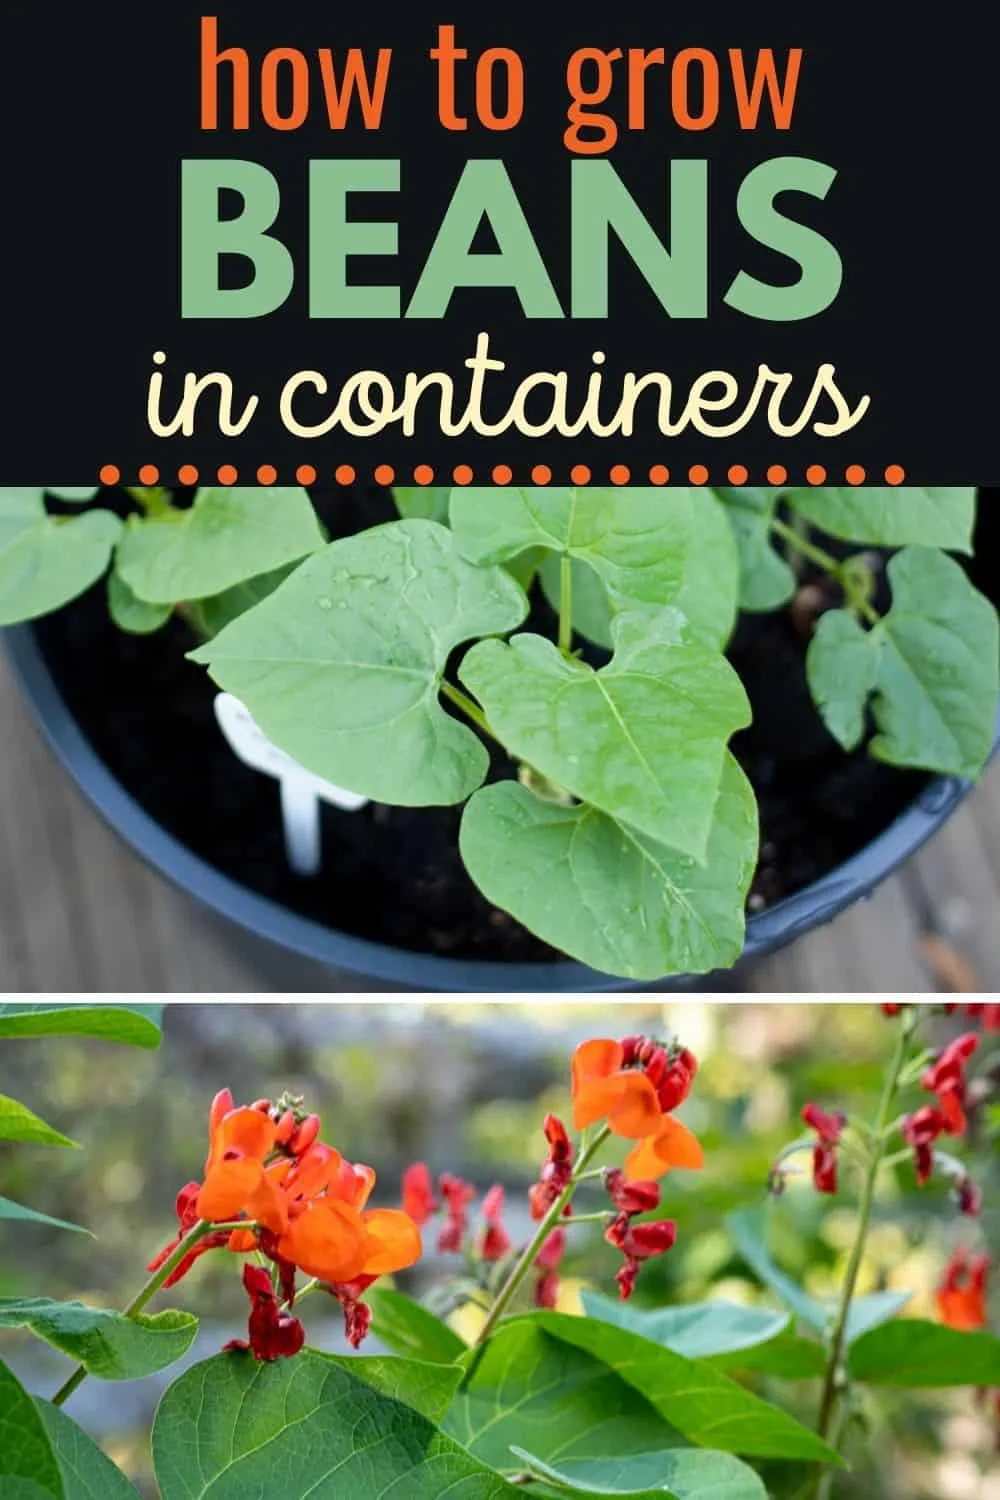 How to grow beans in containers